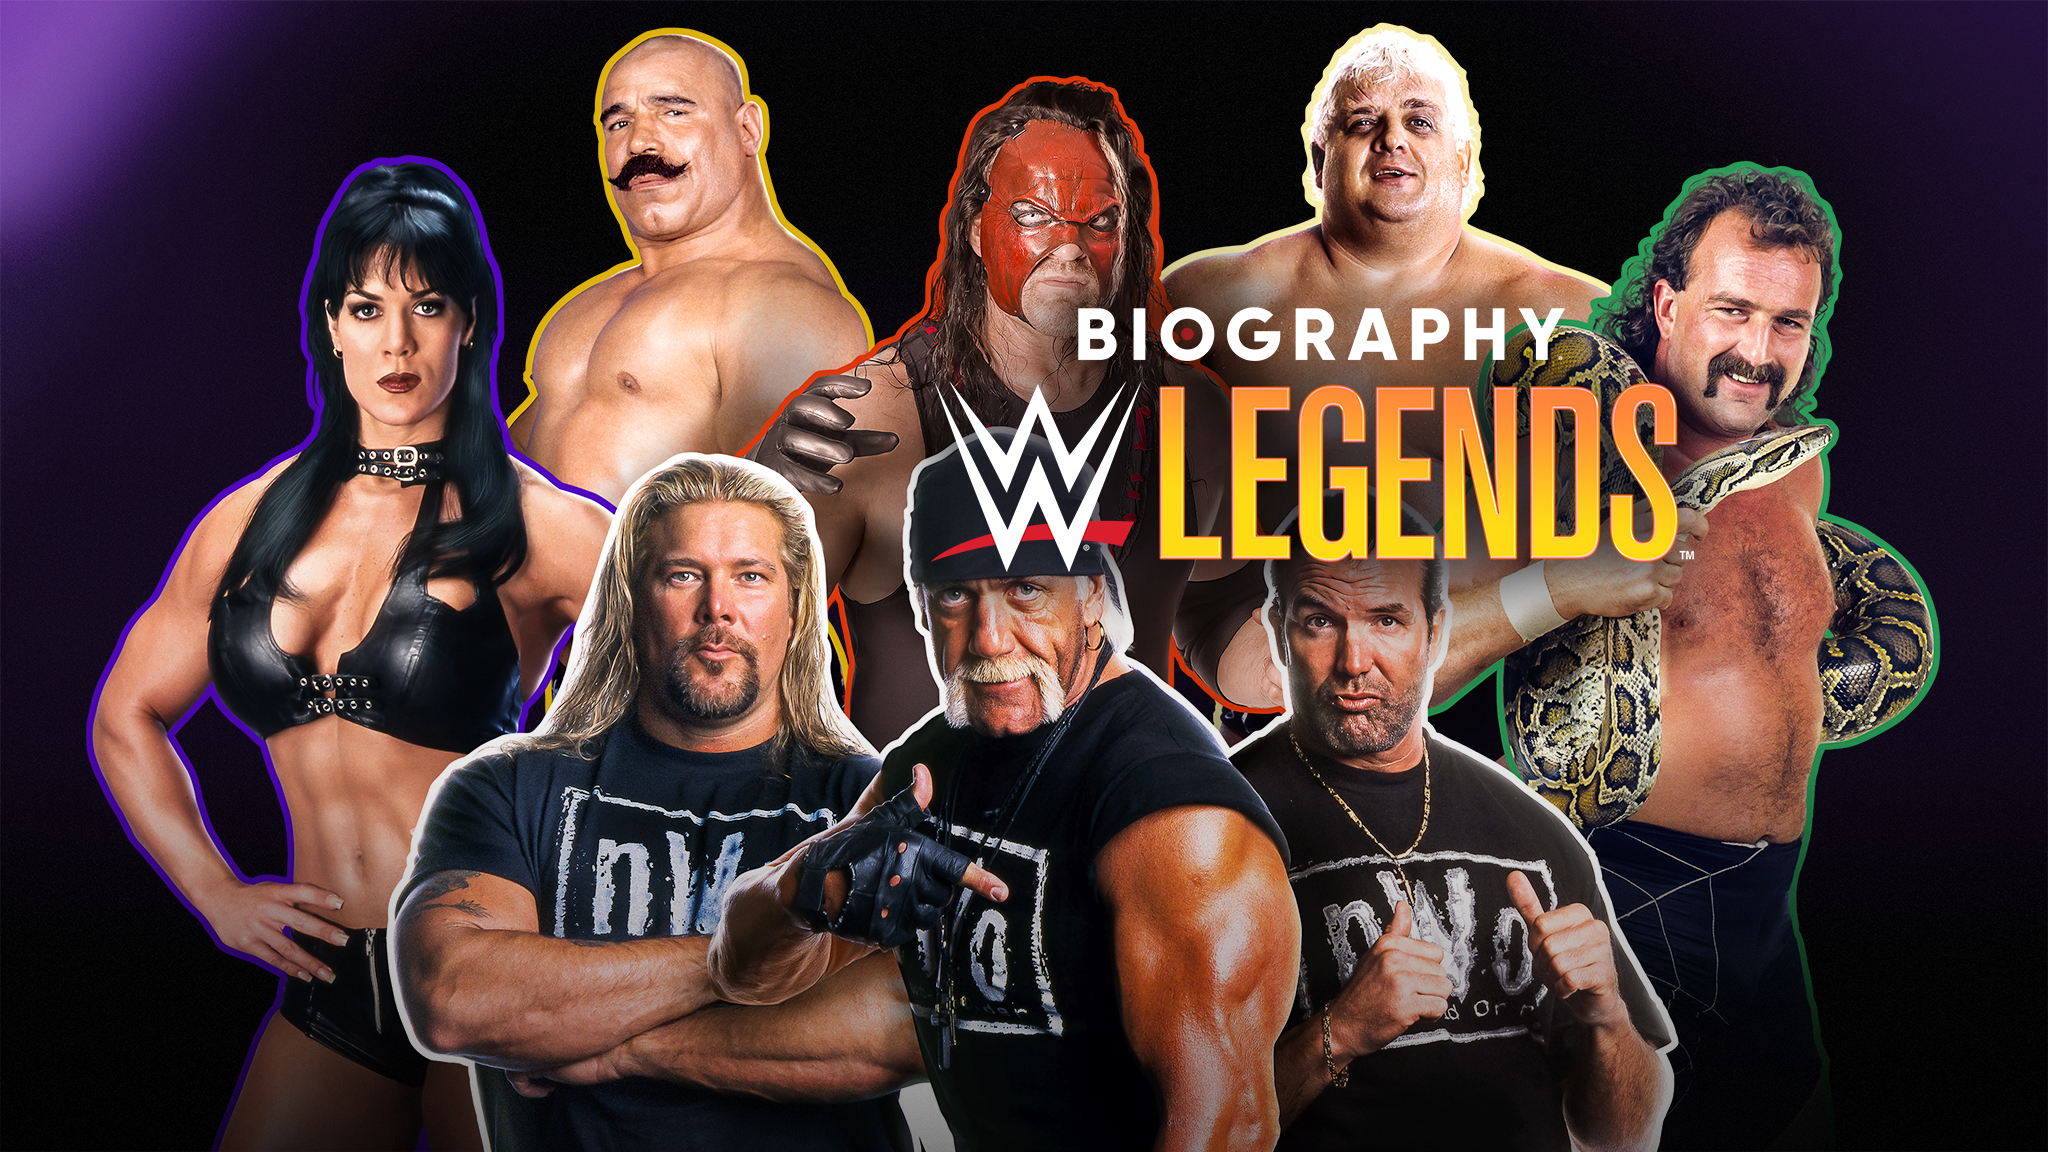 WWE on A&E is Back with New Seasons of 'WWE Rivals' and 'Biography: WWE Legends' Premiering Sunday, February 25